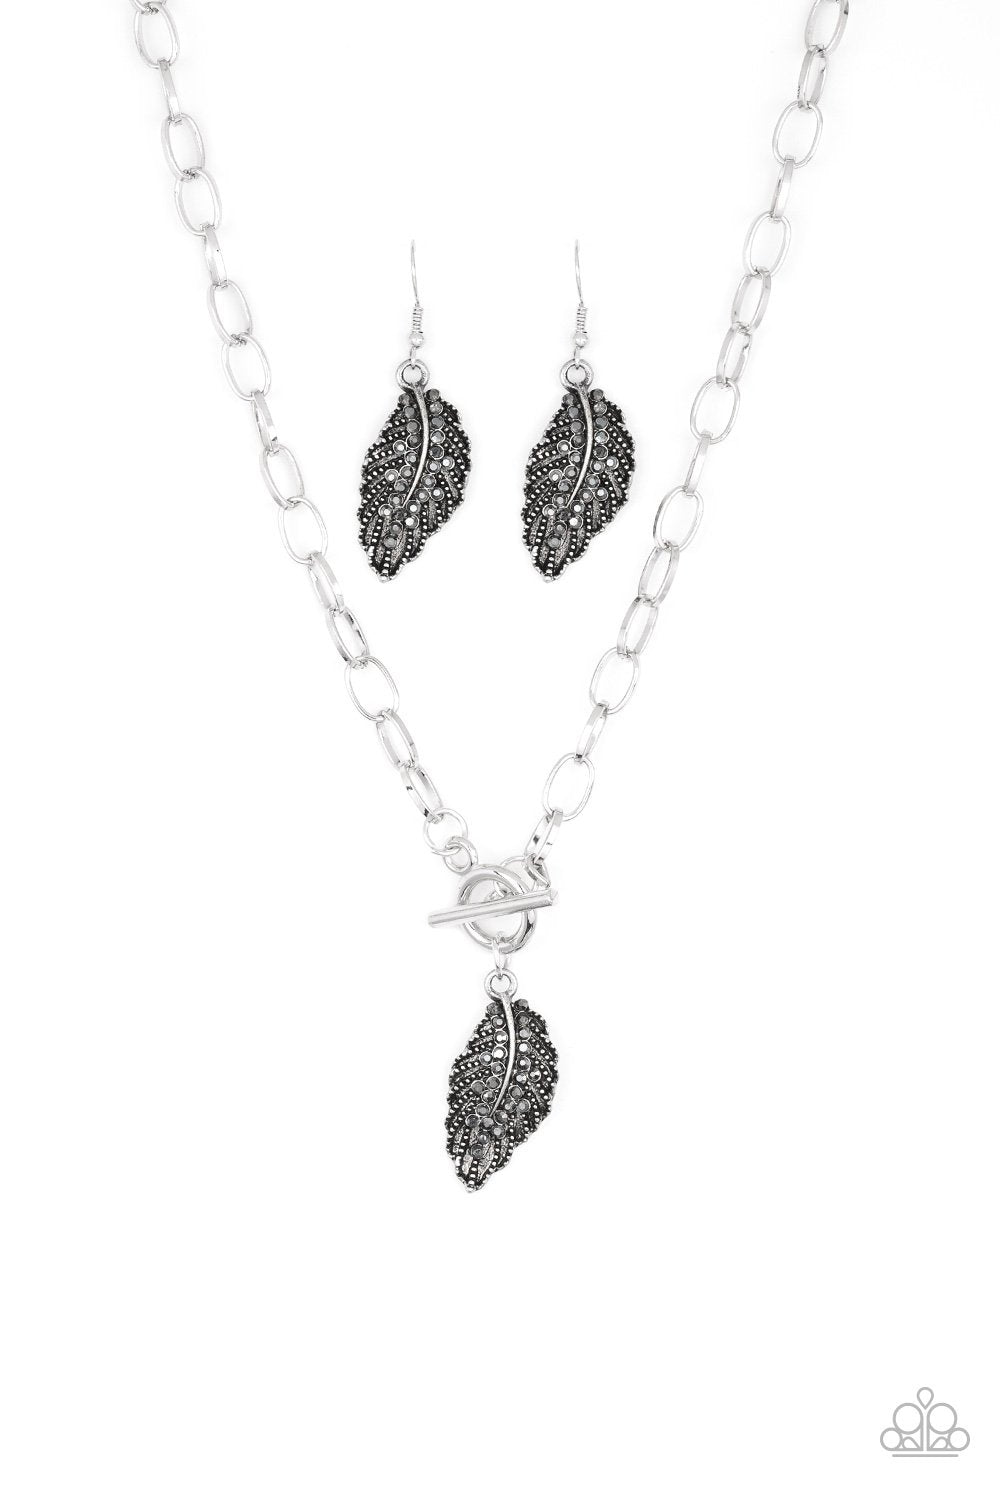 Pilot Quest Silver Feather Necklace and matching Earrings - Paparazzi Accessories-CarasShop.com - $5 Jewelry by Cara Jewels